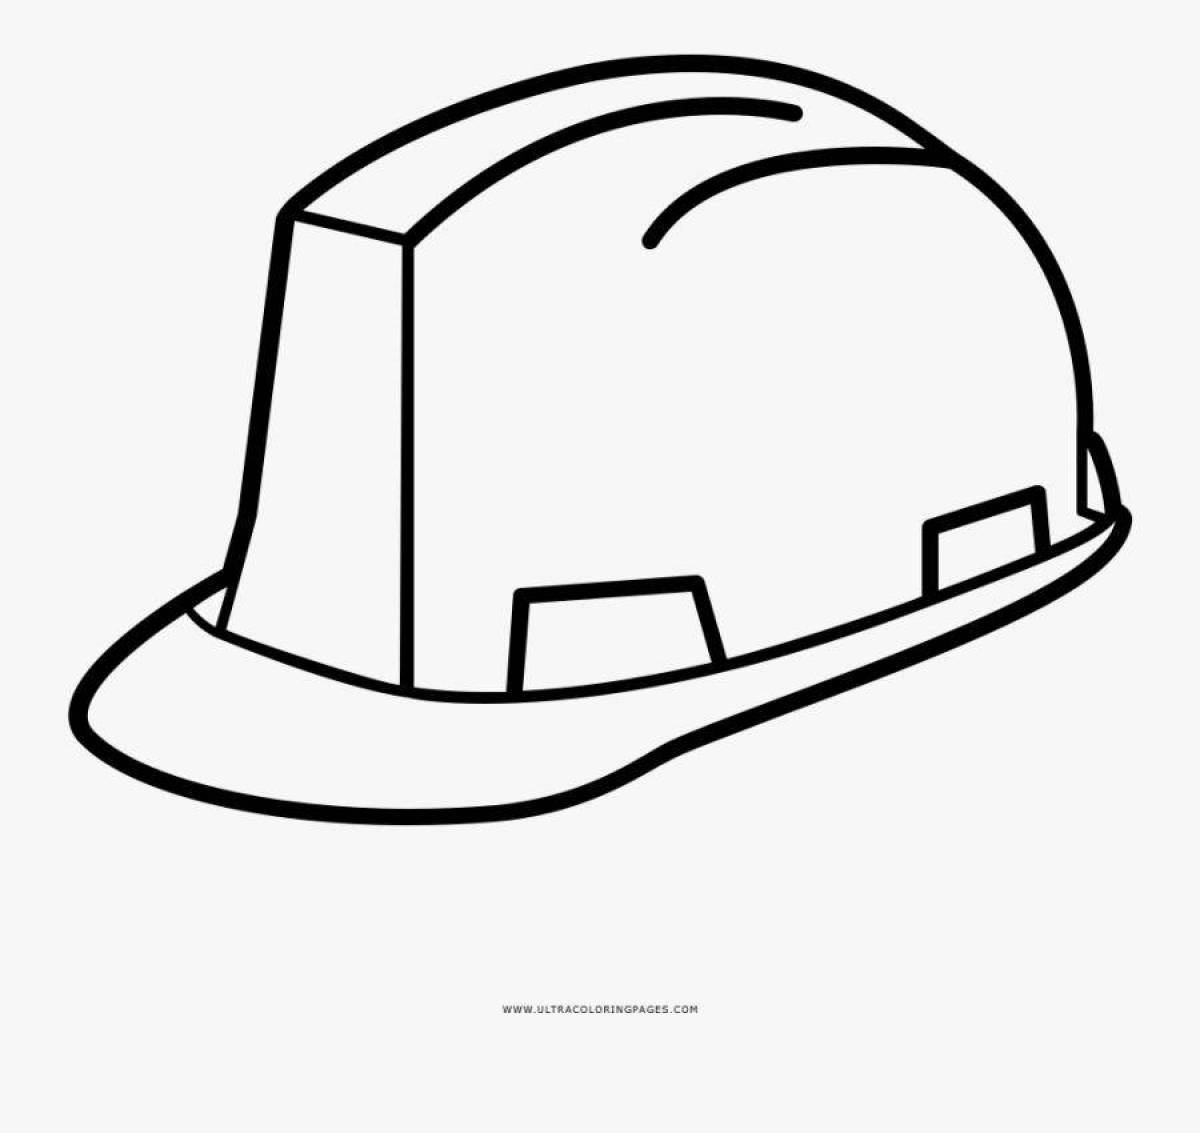 Shiny helmet coloring page